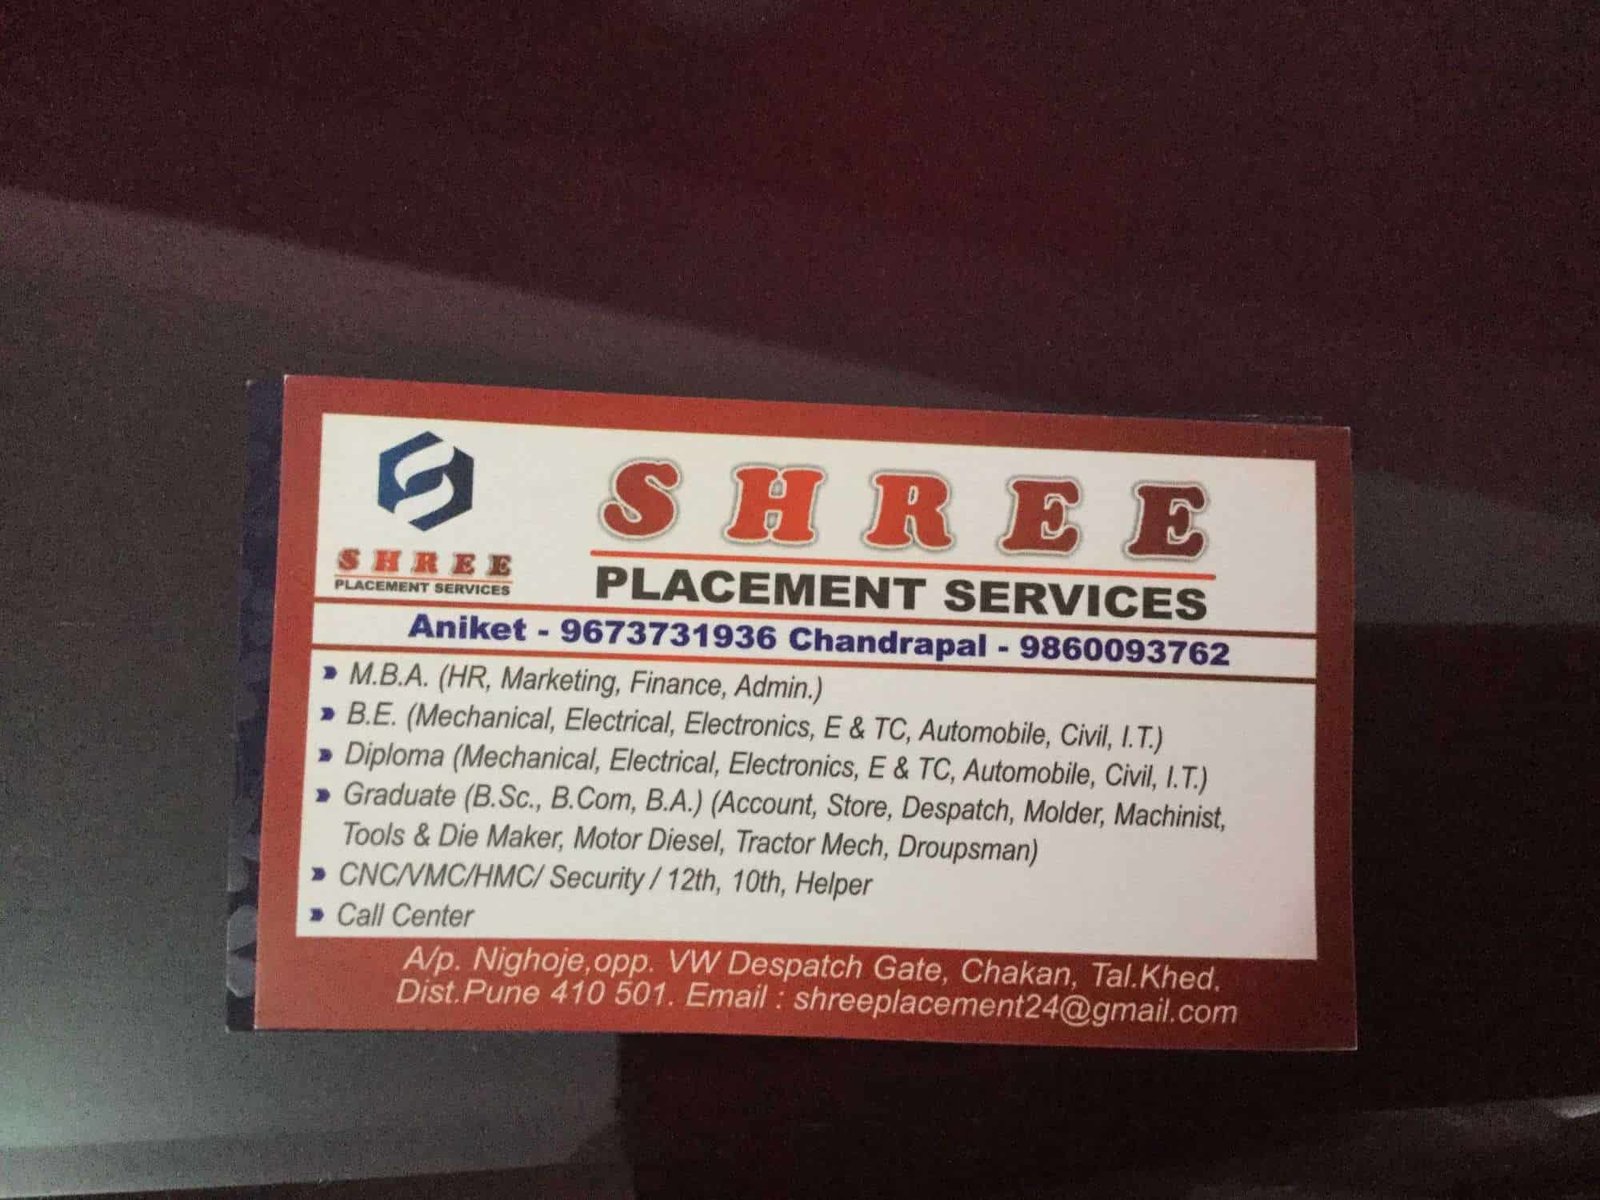 Shree Placement Service